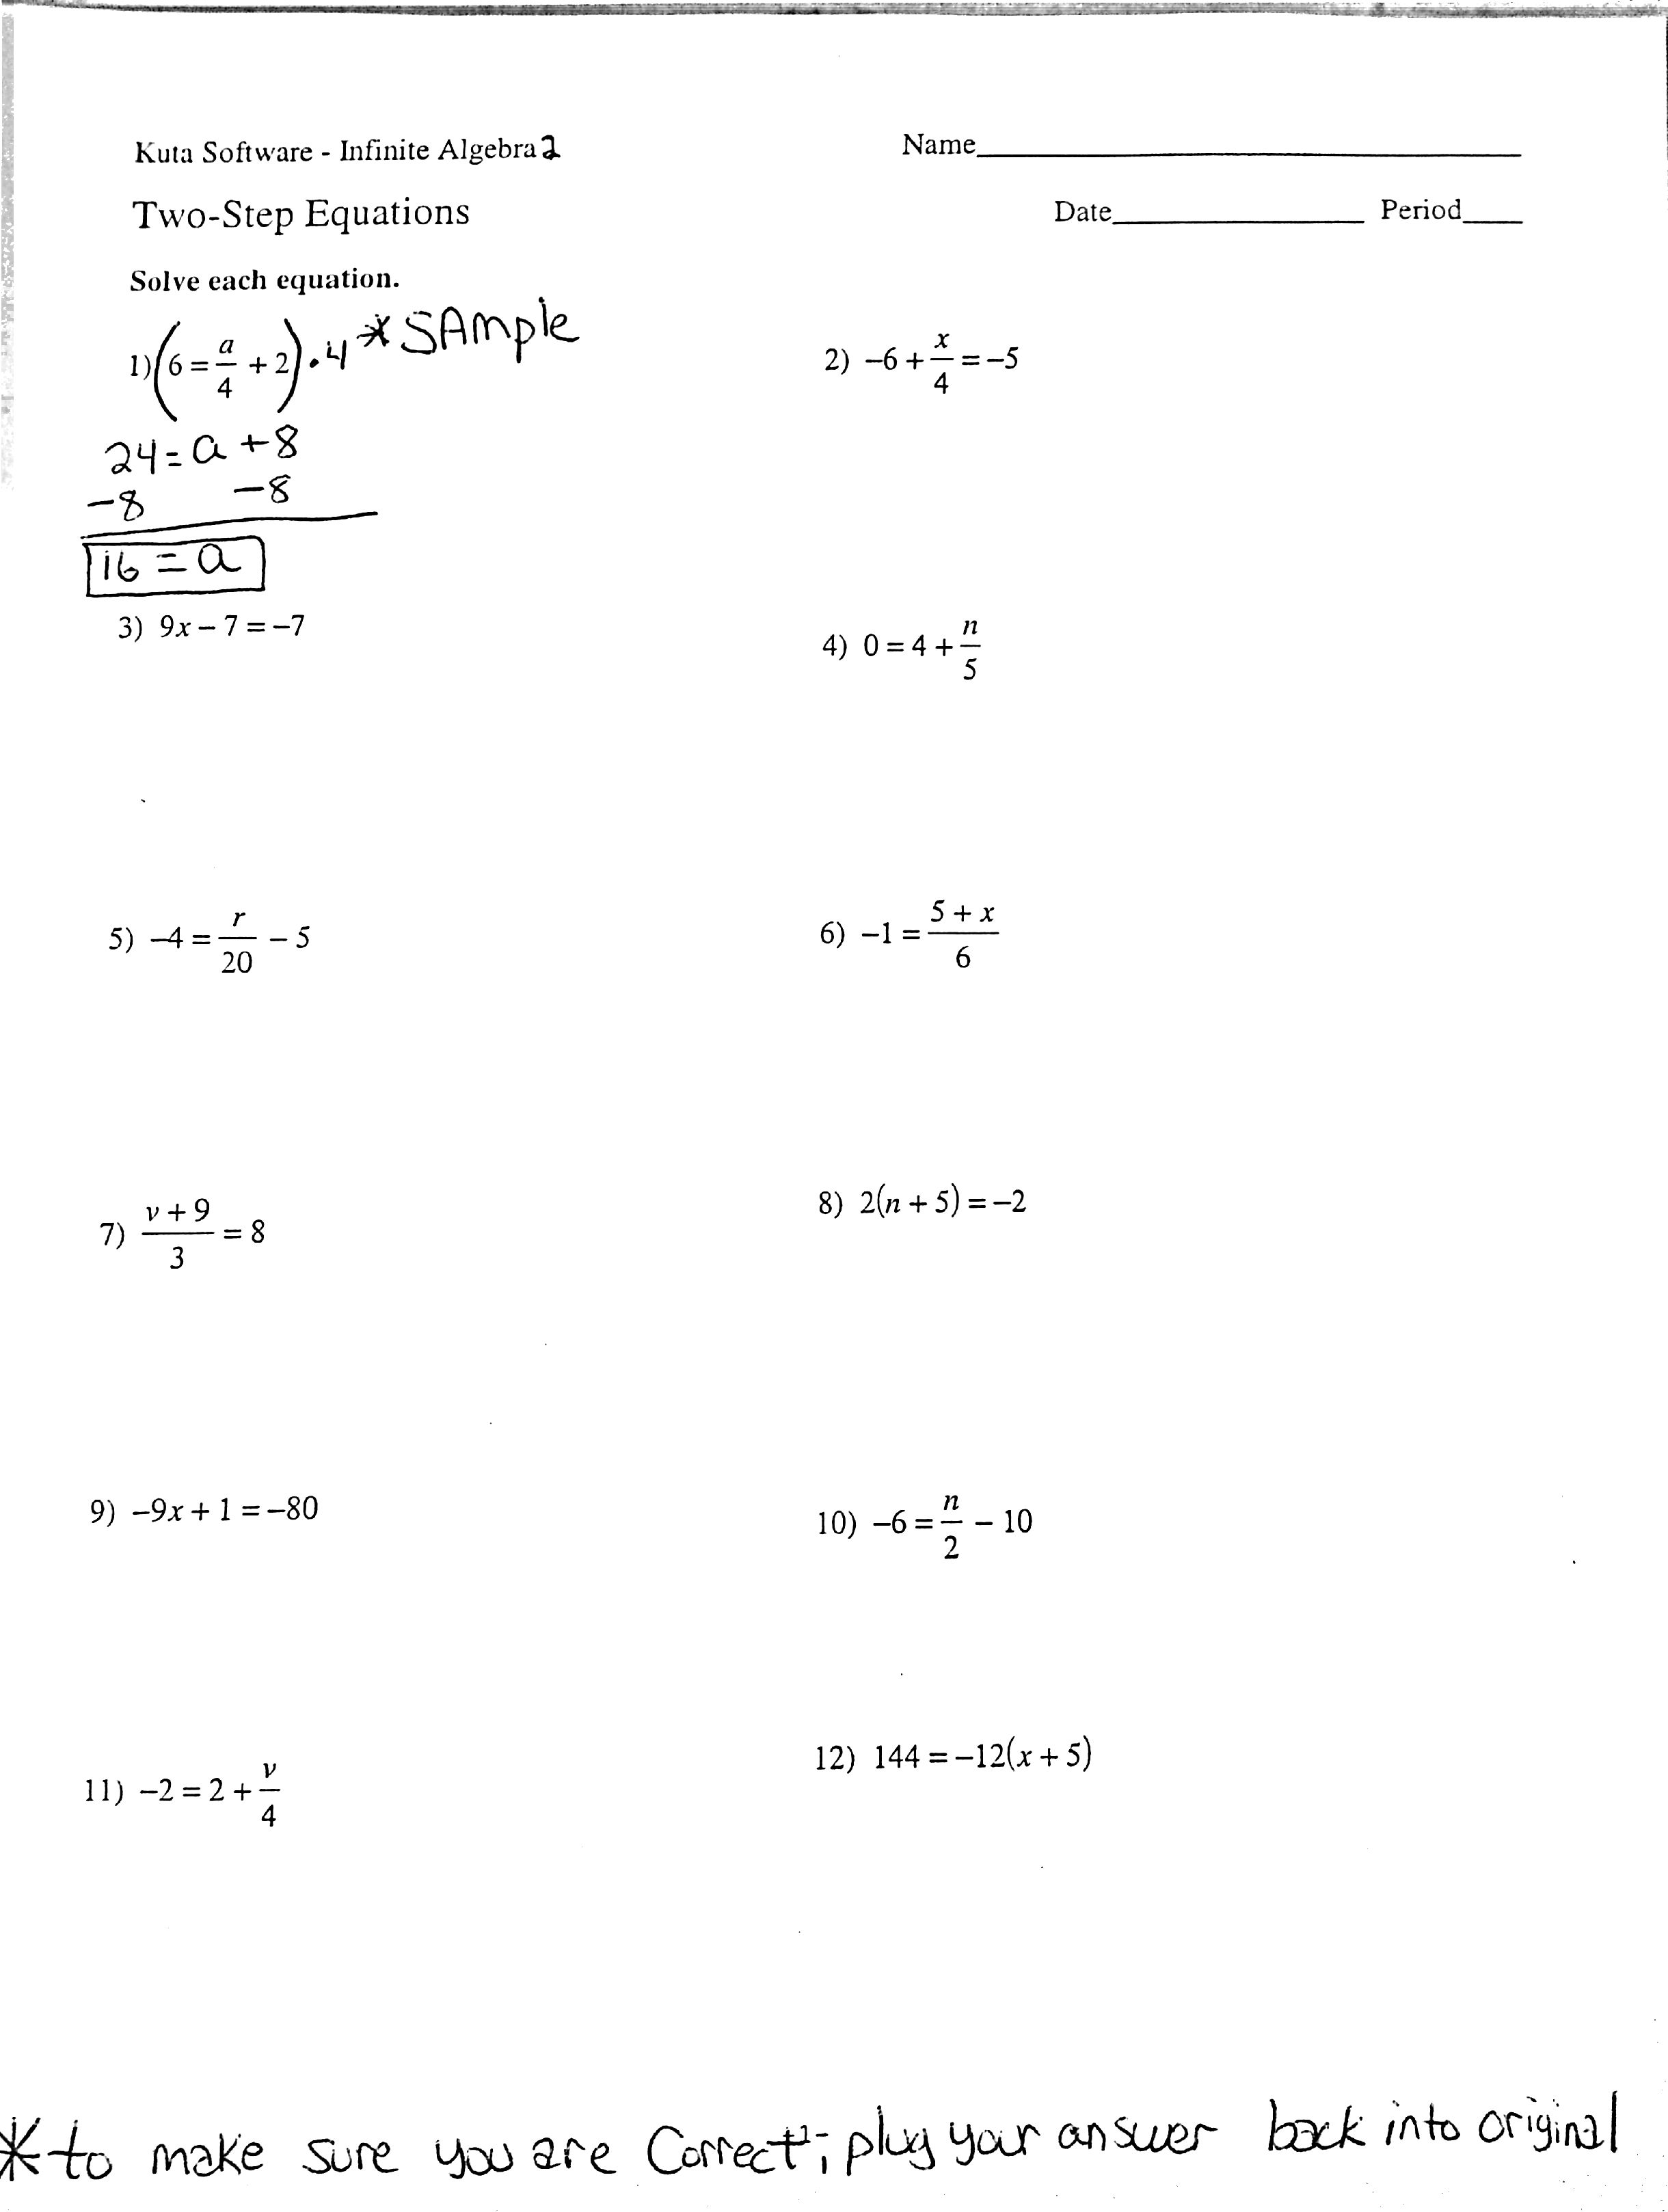 9 Best Images of Two-Step Equations Worksheets With Answer Key - Two